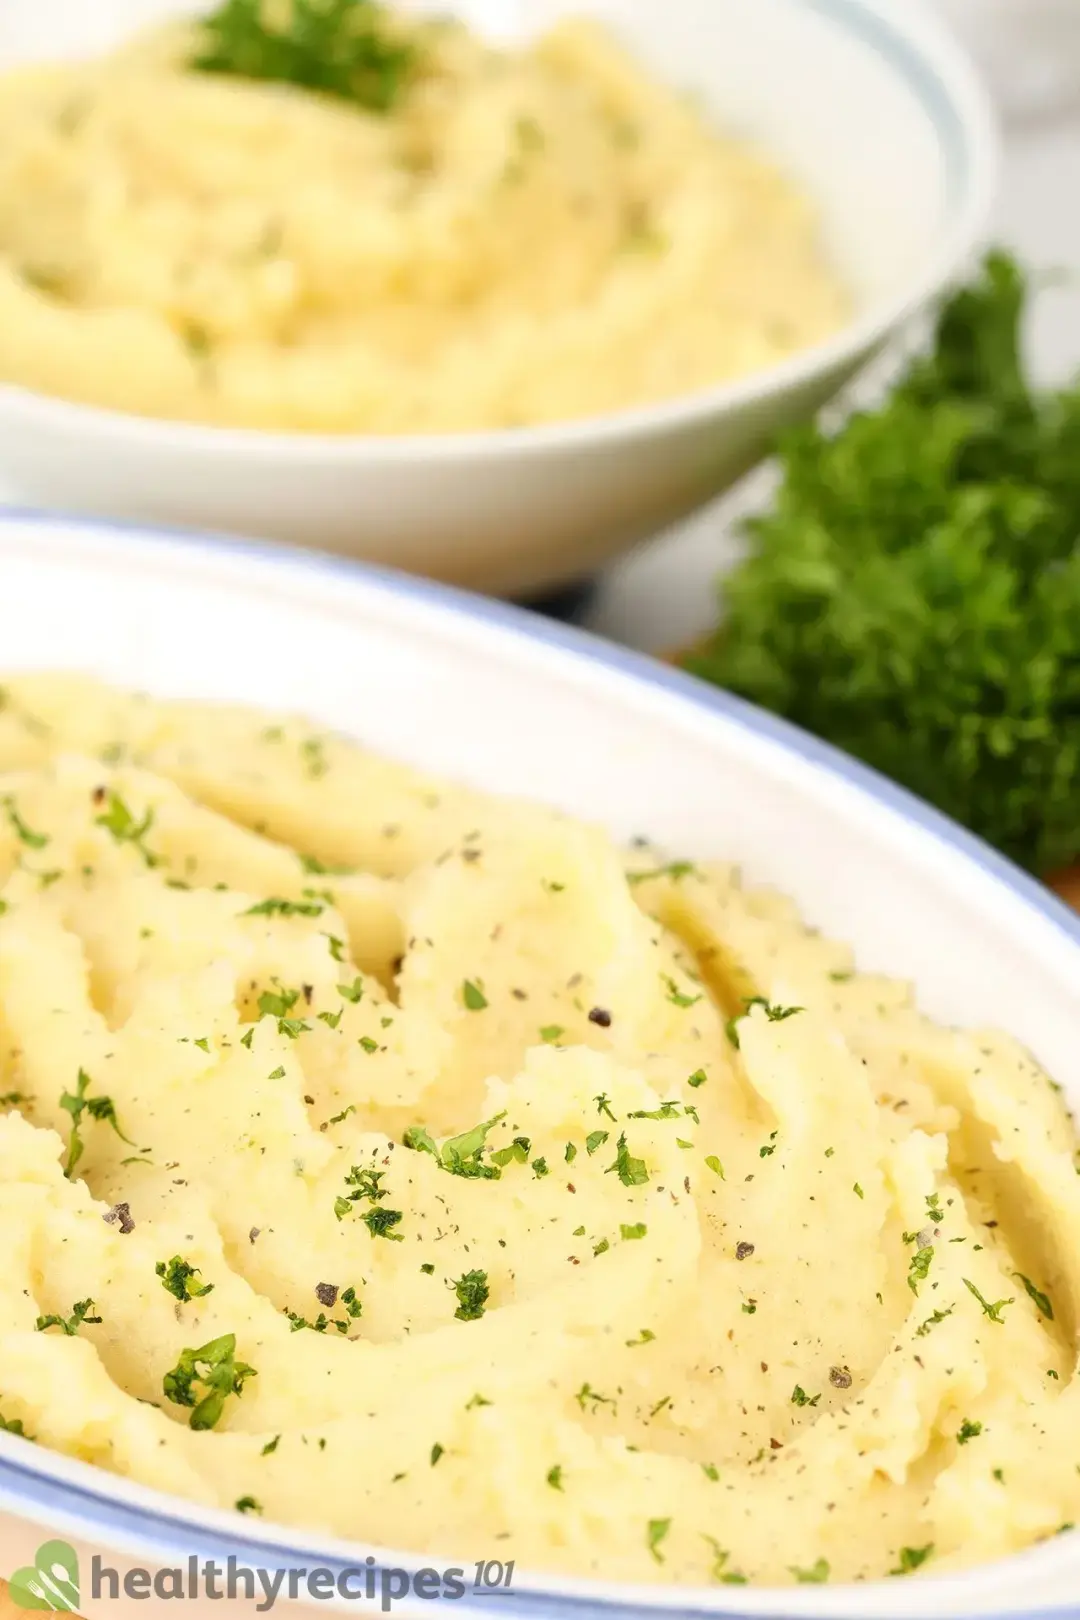 what goes well with mashed potatoes